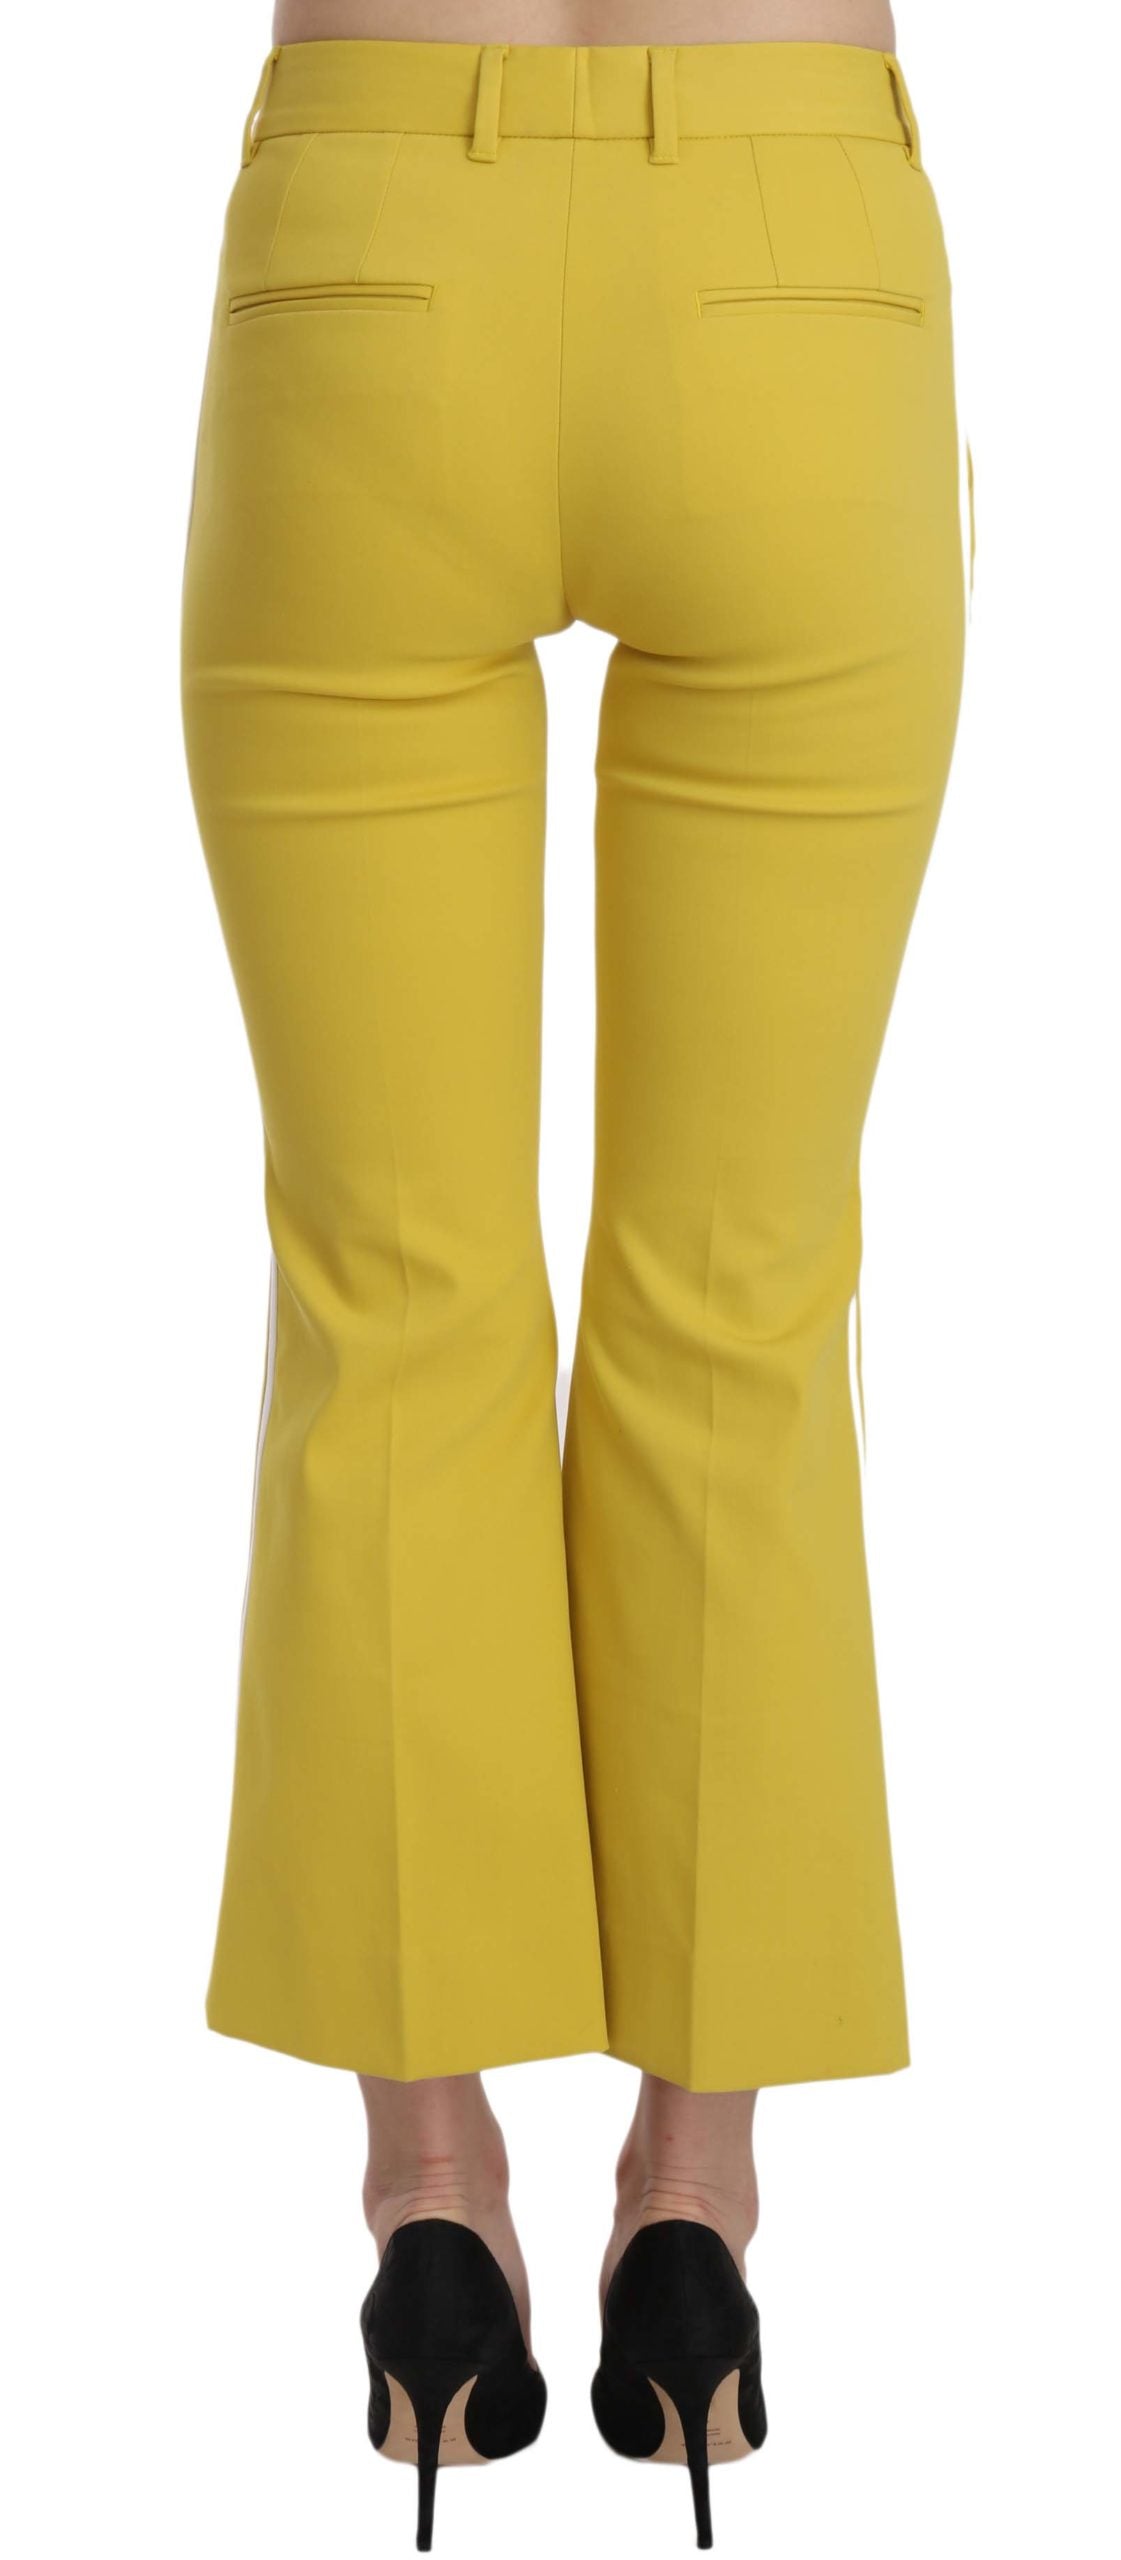 Chic Yellow Flare Pants for Elegant Evenings